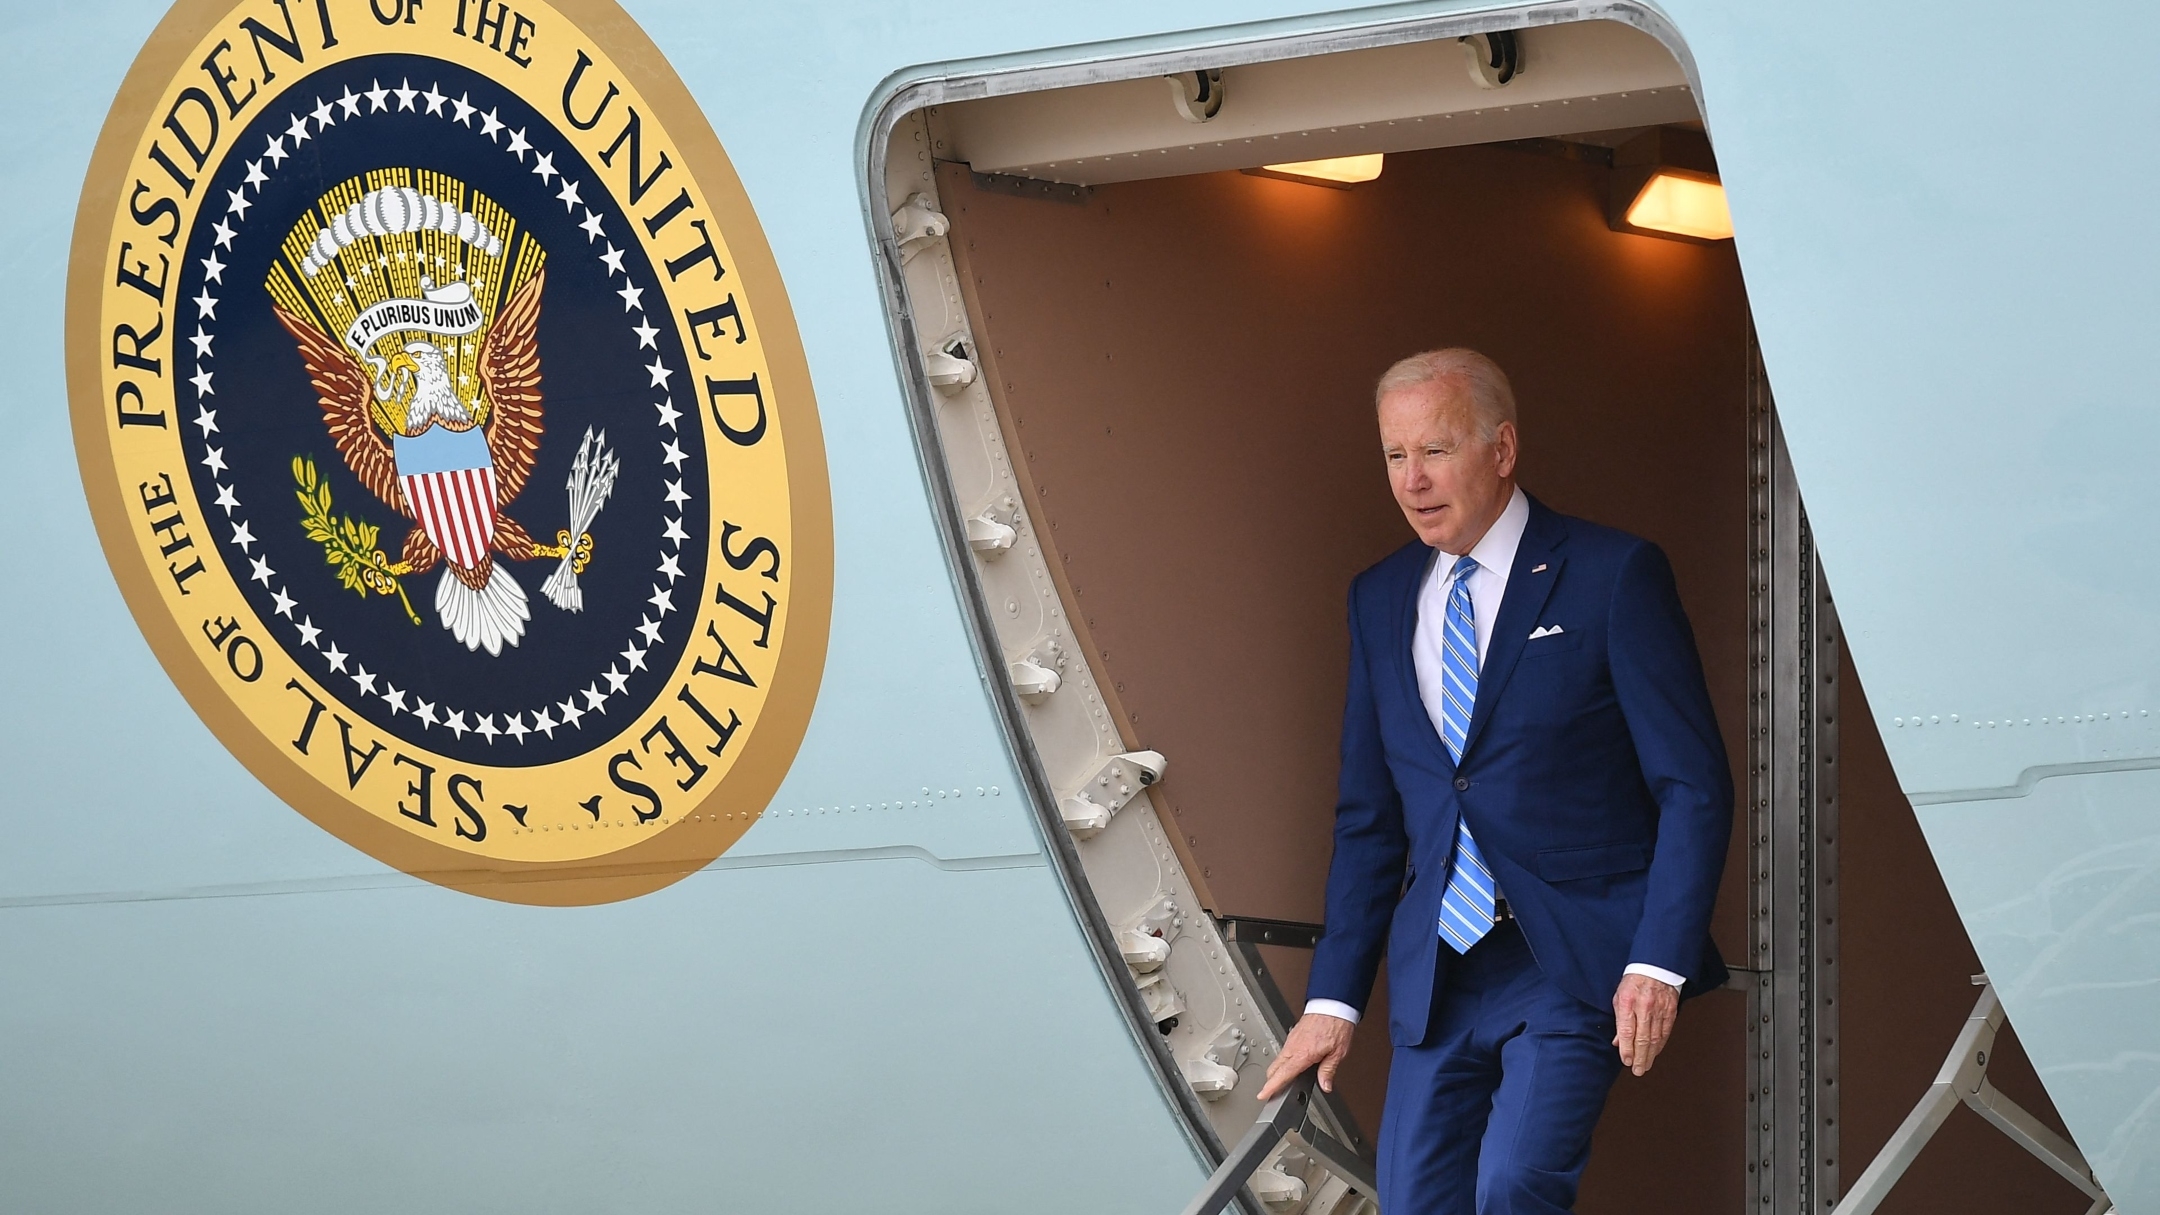 President Joe Biden steps off Air Force One upon arrival at Des Moines International Airport in Des Moines, April 12, 2022.